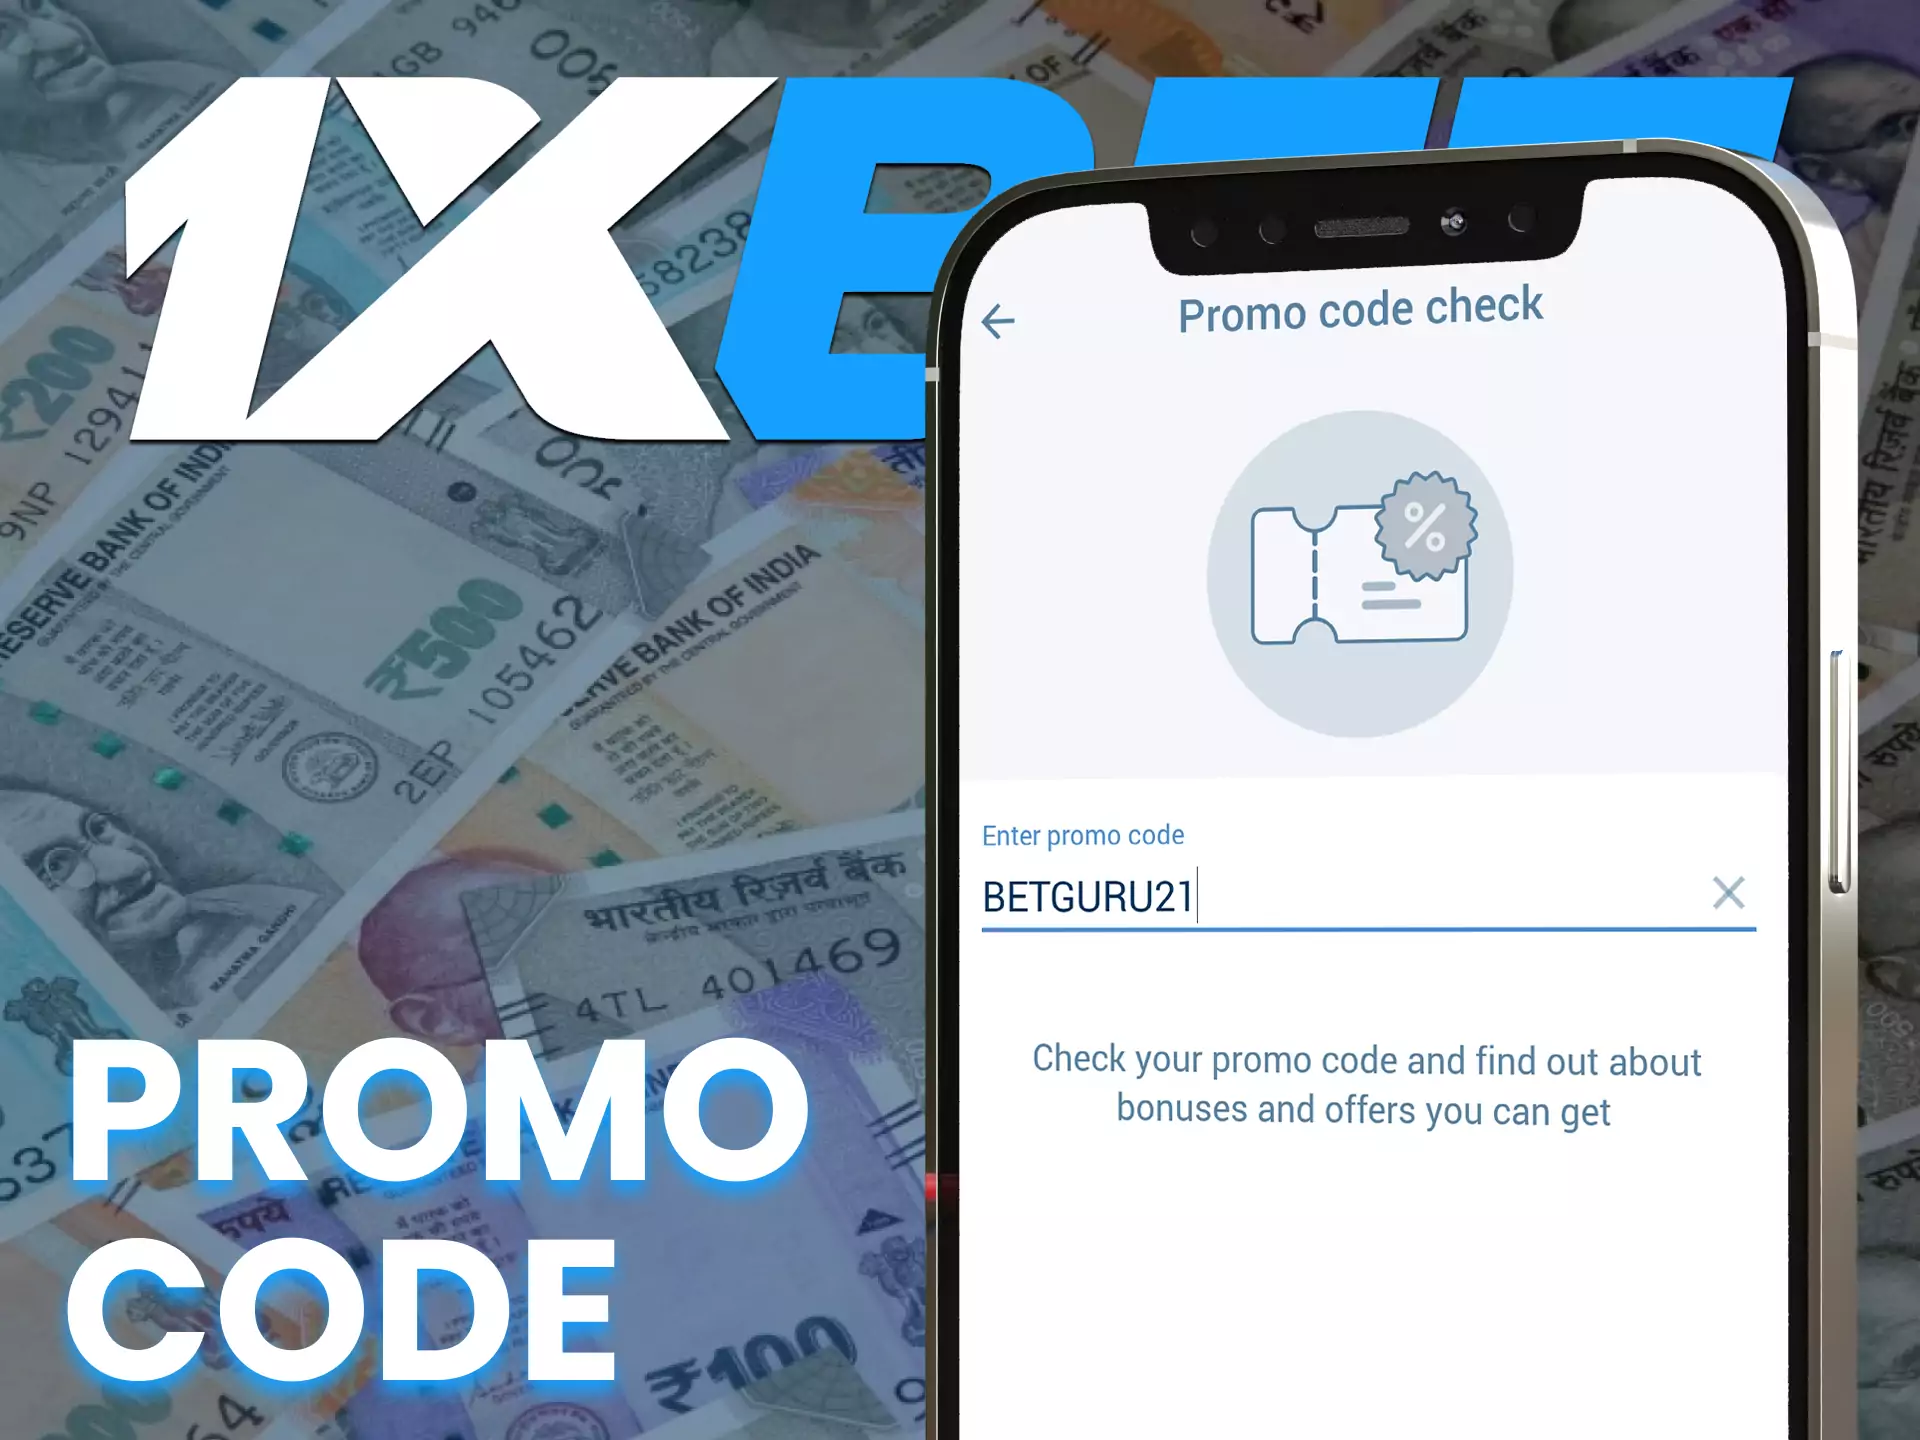 At 1xBet use a special promo code to get more benefits.